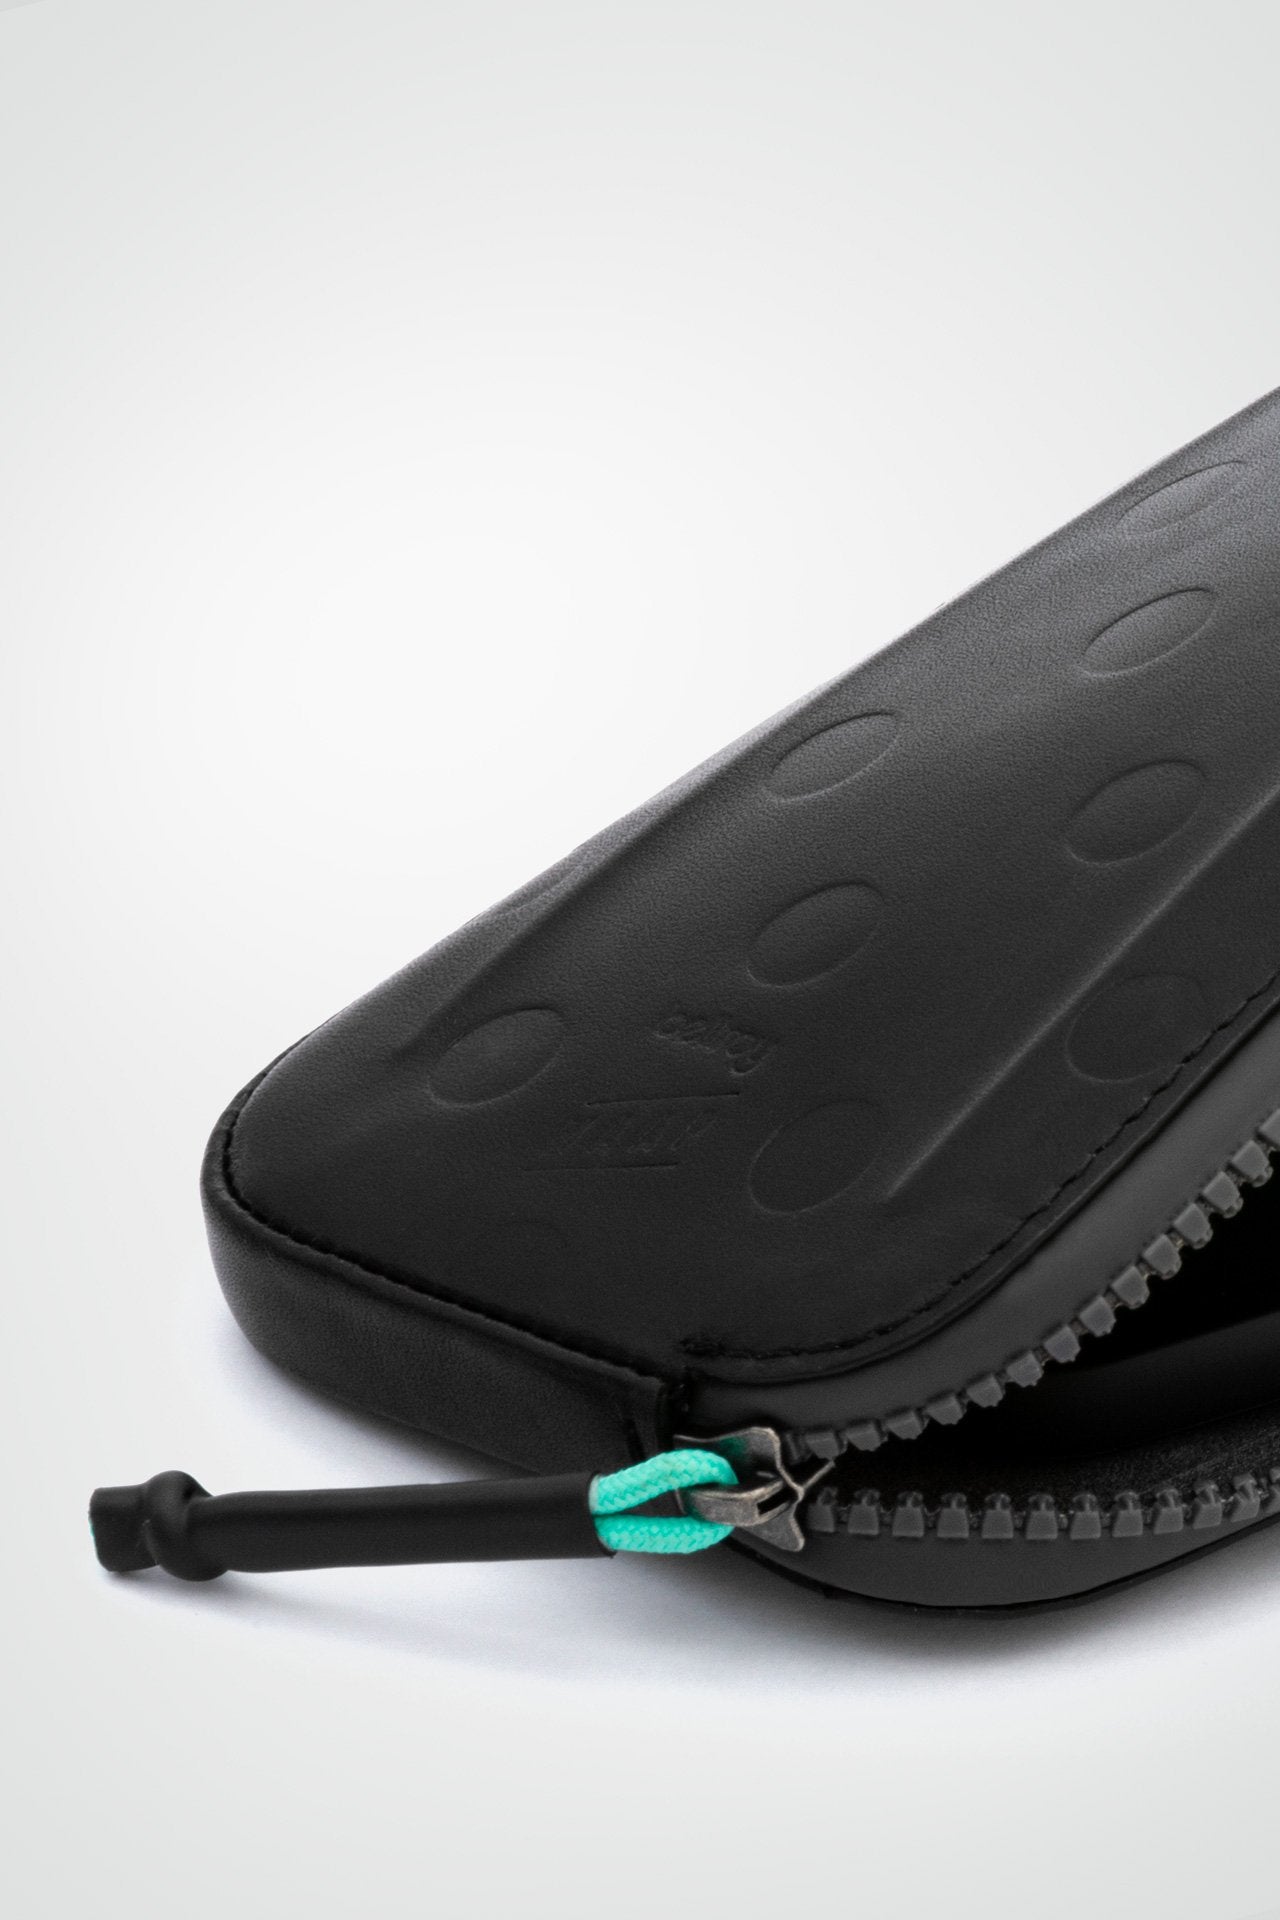 MAAP x Bellroy All-Conditions Phone Pocket Plus - MAAP Cycling Apparel